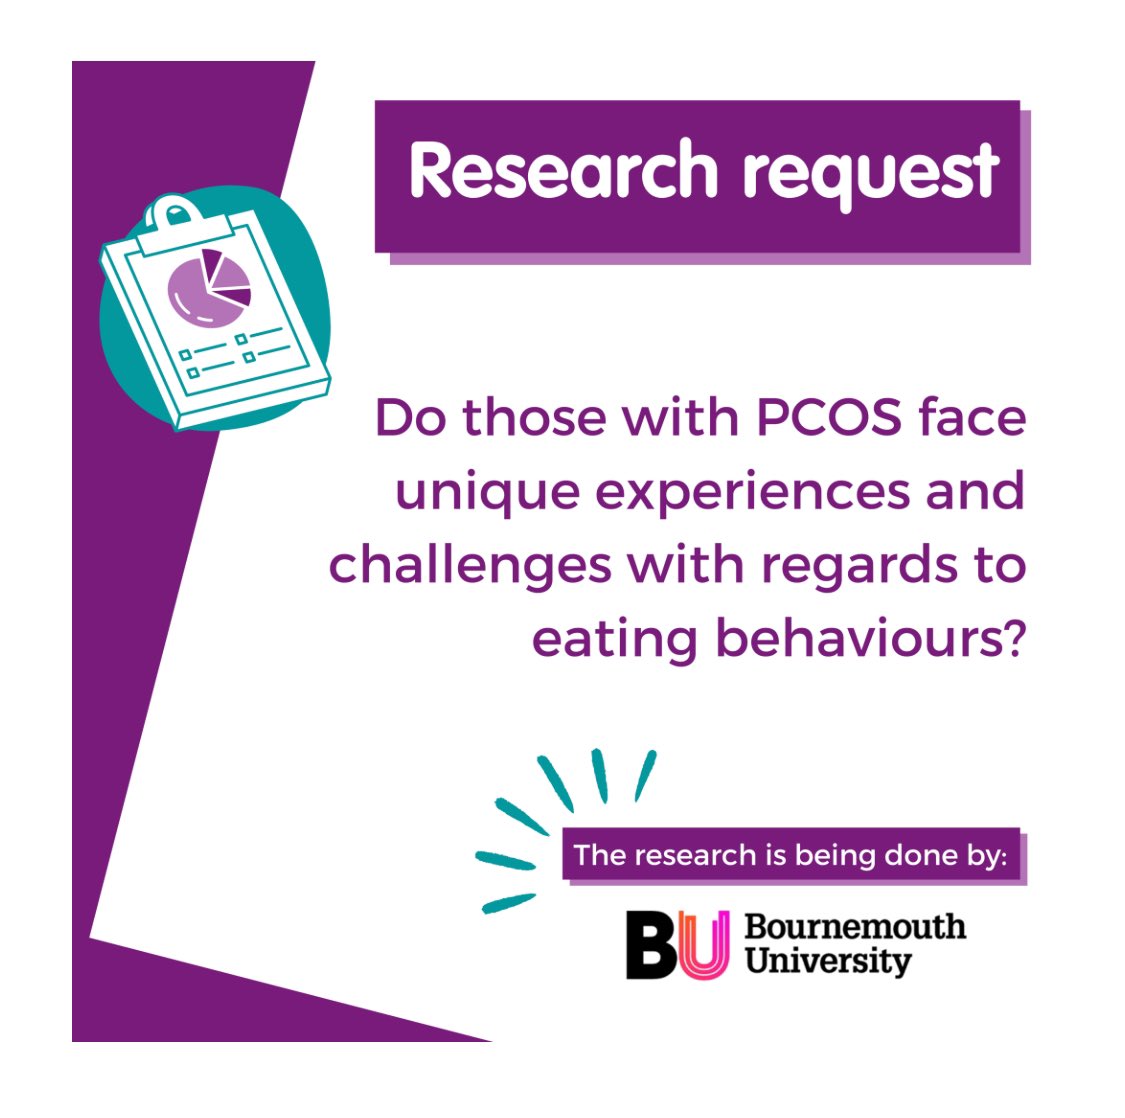 A qualitative study exploring the unique experiences & challenges related to eating behavior among people with #PCOS. Insights will contribute to understanding of the impact on daily life & help inform support strategies. Contact s5322659@bournemouth.ac.uk #womenshealth #research